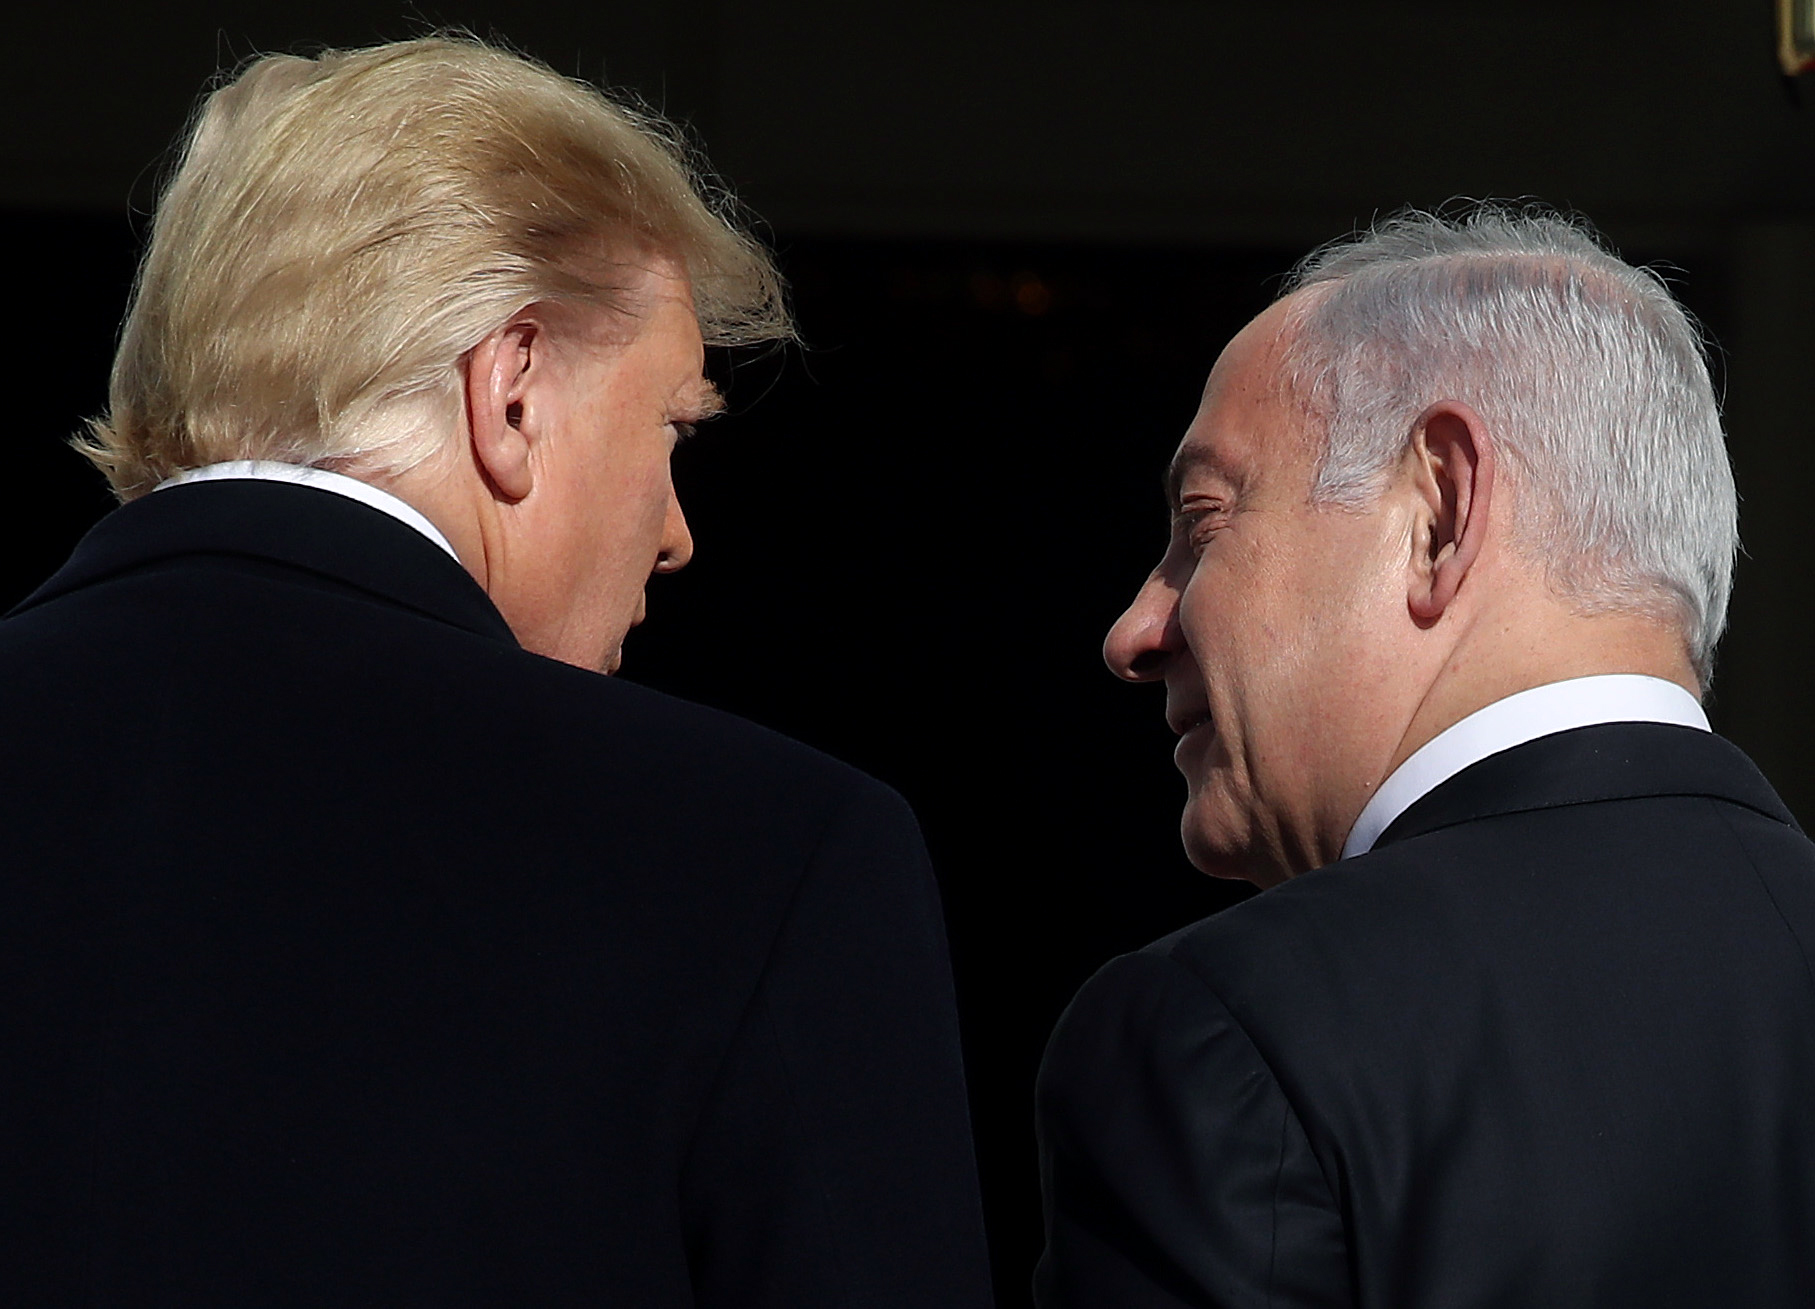 Trump and Netanyahu, speaking to one another while walking away from the camera.